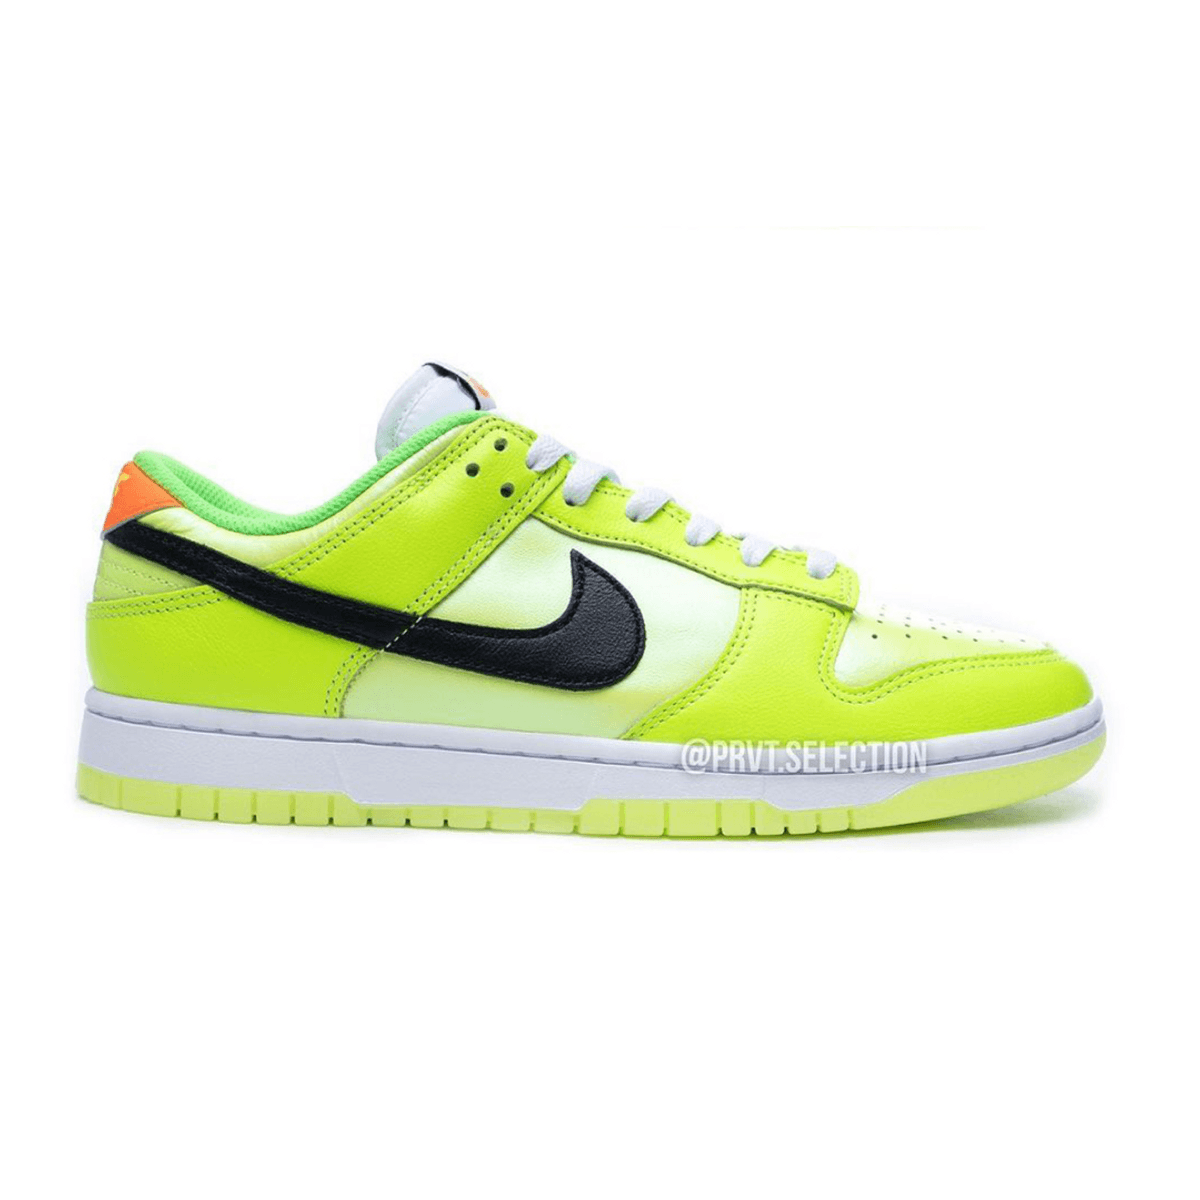 No Need For A Night-Light When You Own The Nike Dunk Low Glow In The Dark